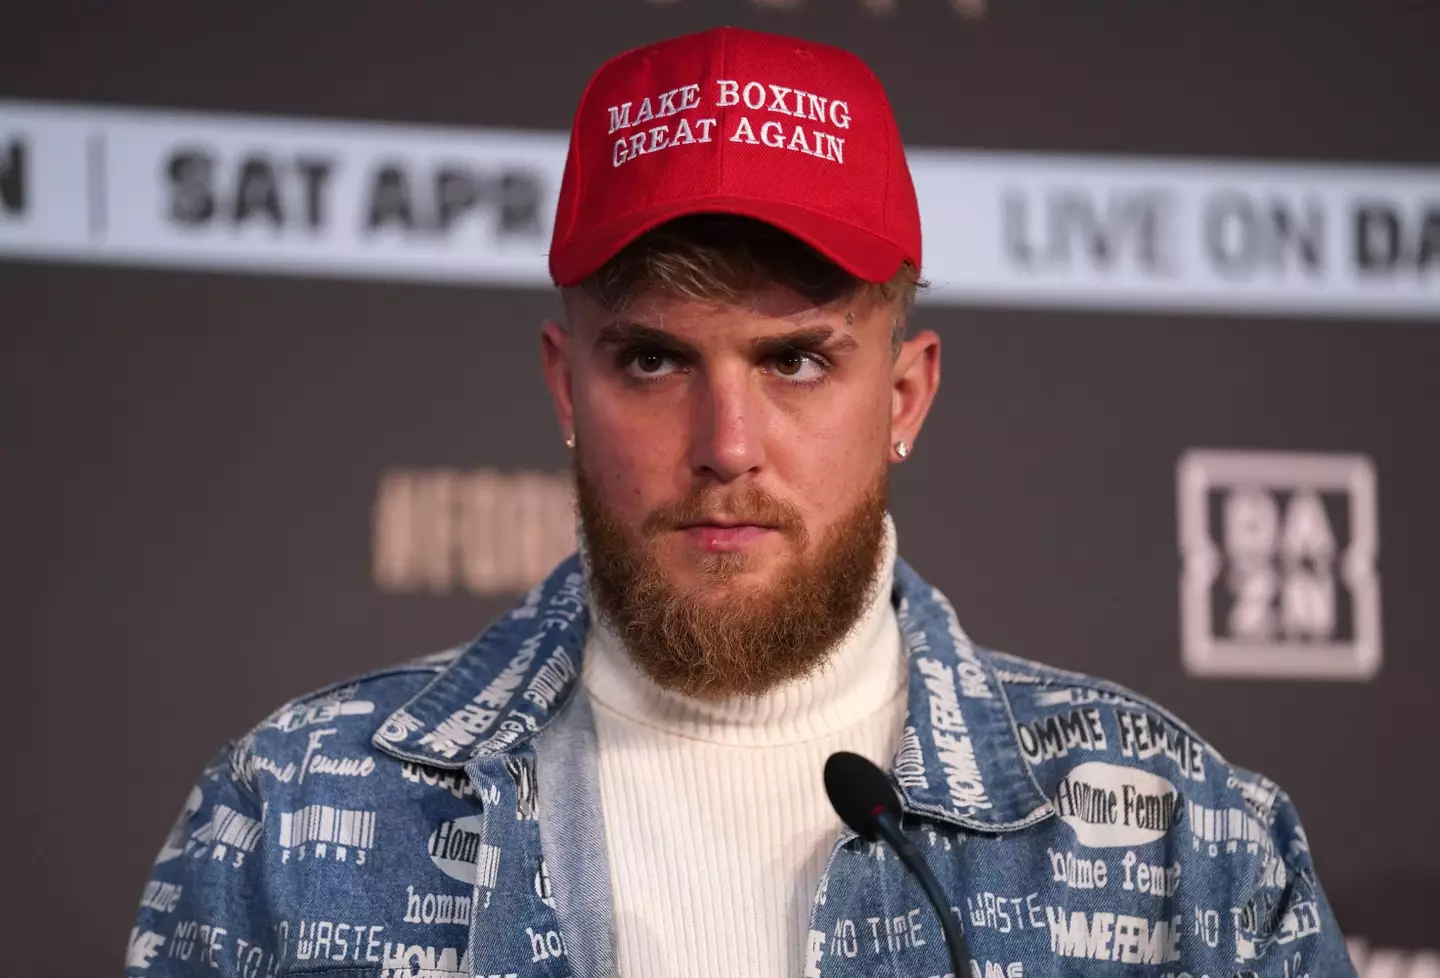 It remains to be seen how 'great' Jake Paul's boxing career will be.